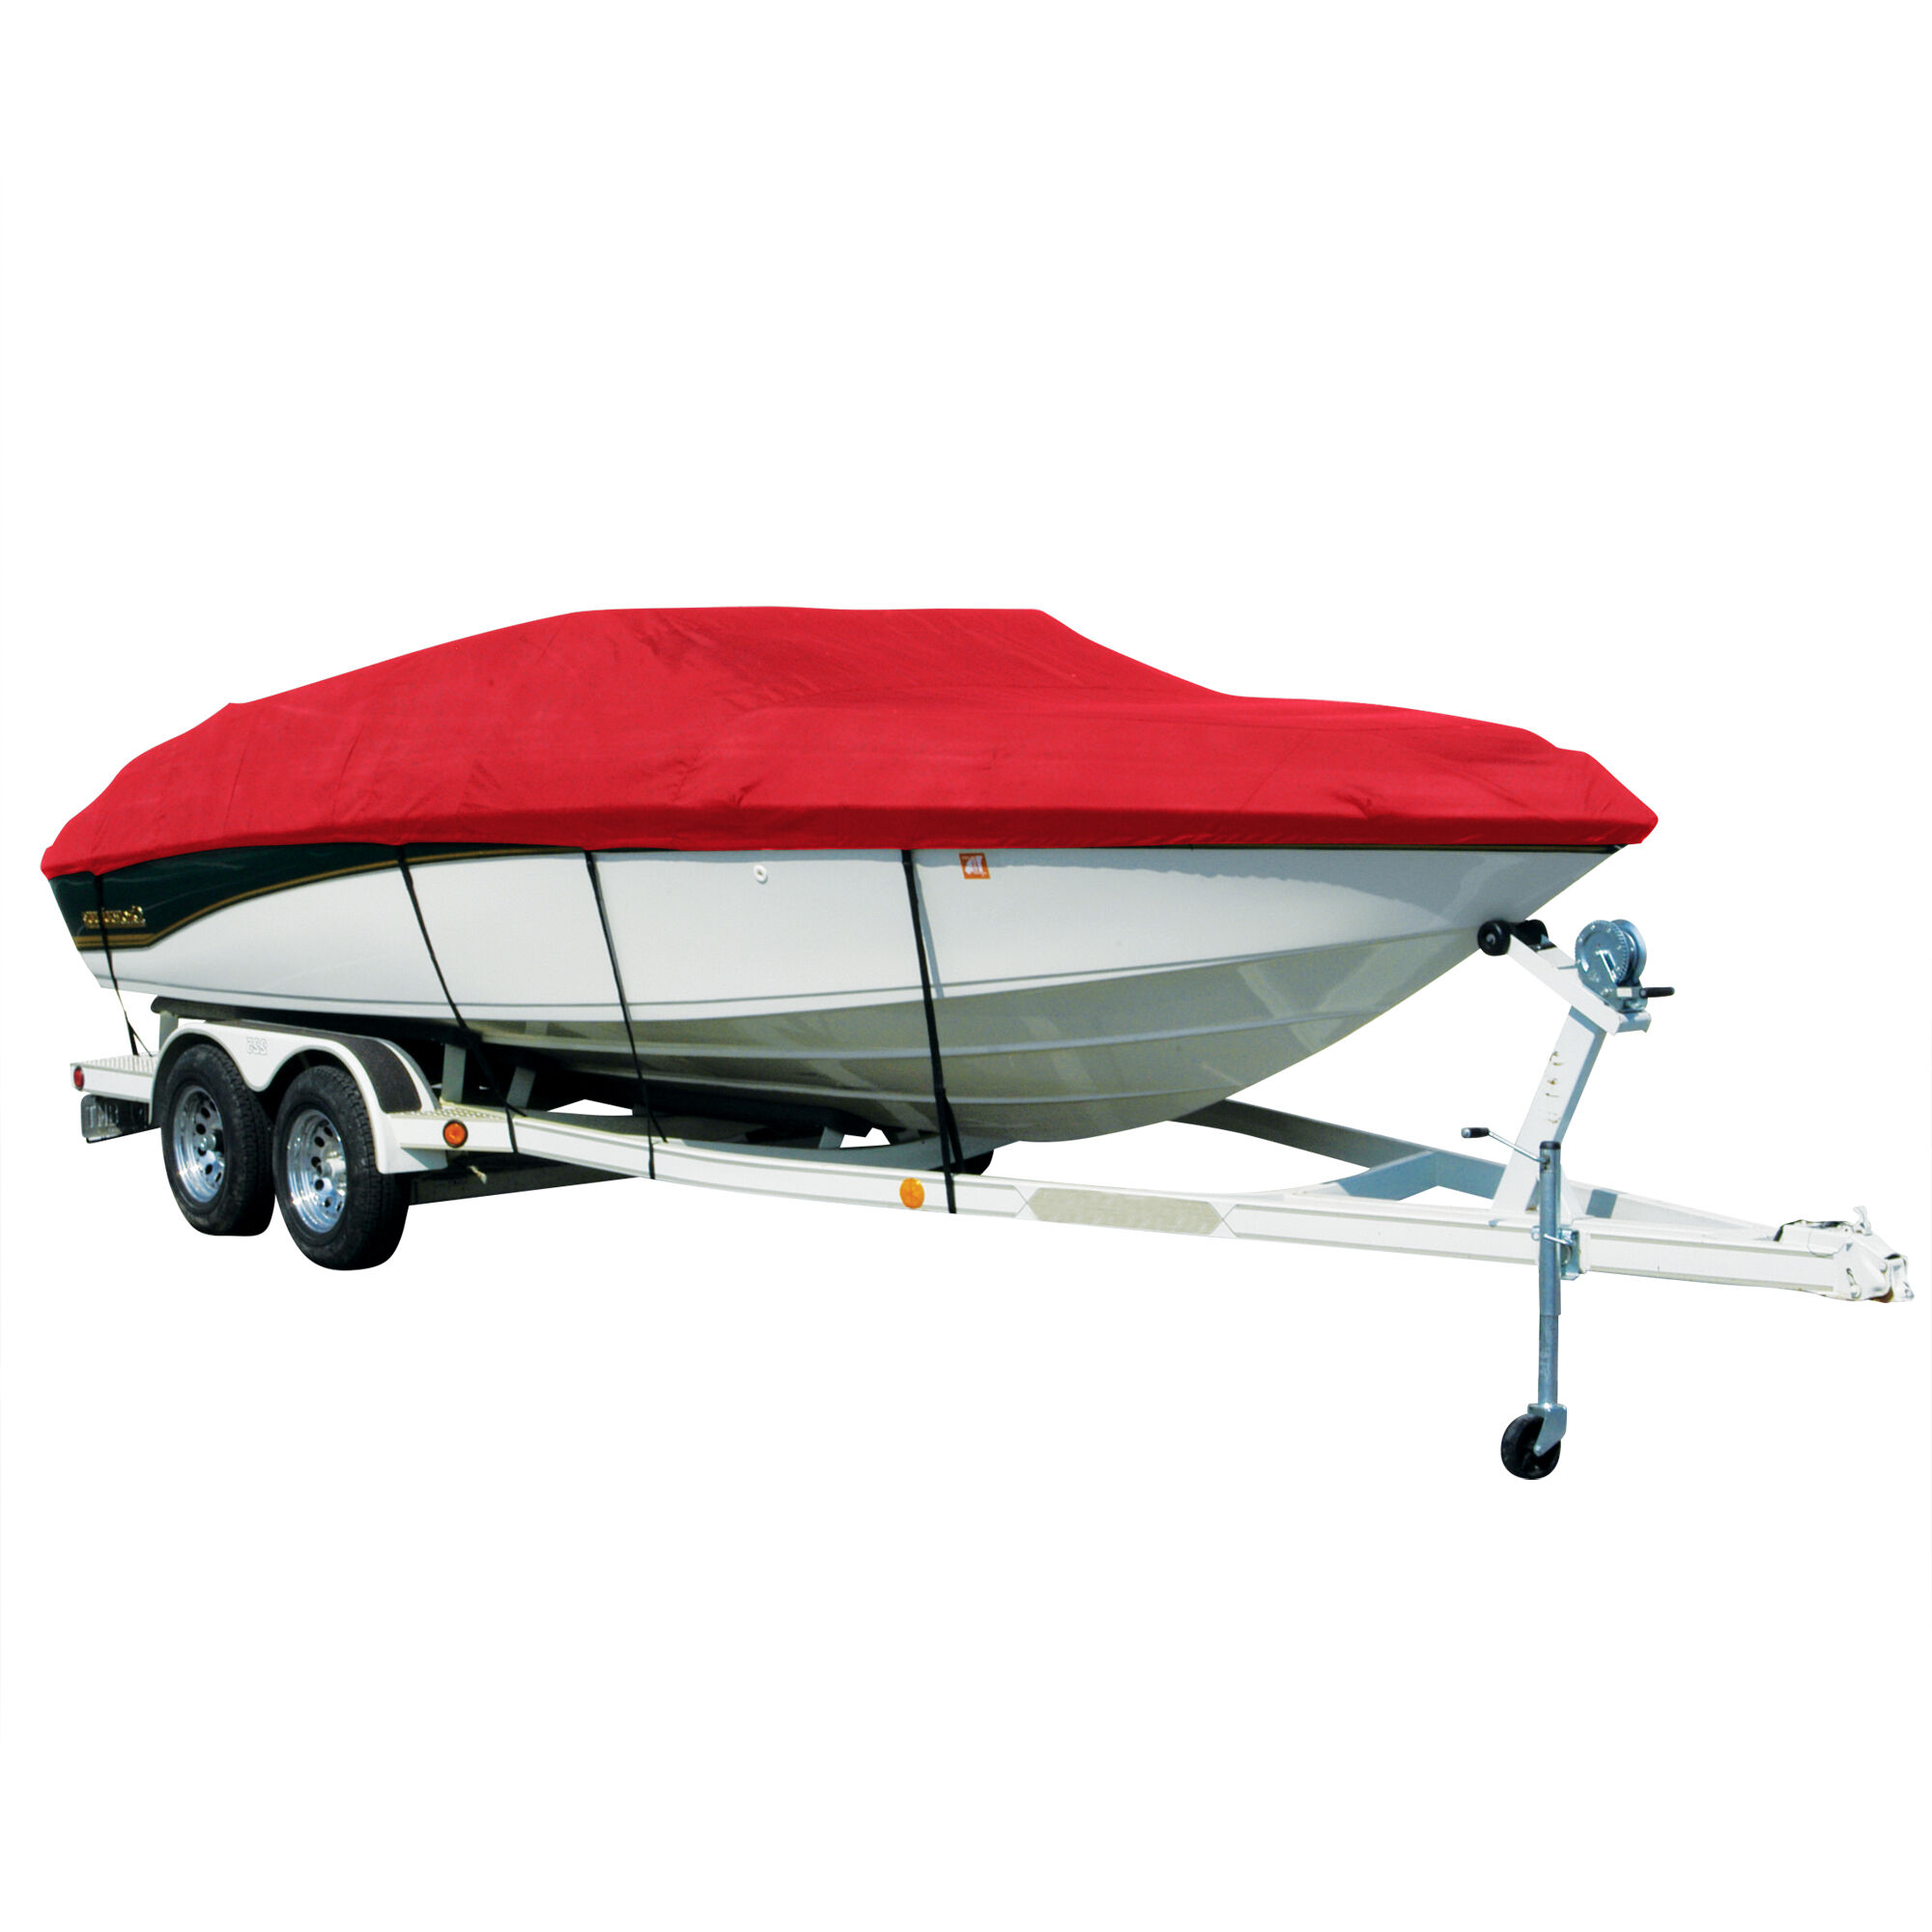 Covermate Exact Fit Sharkskin Boat Cover For BAYLINER CLASSIC 2452 CD HARD TOP in Red